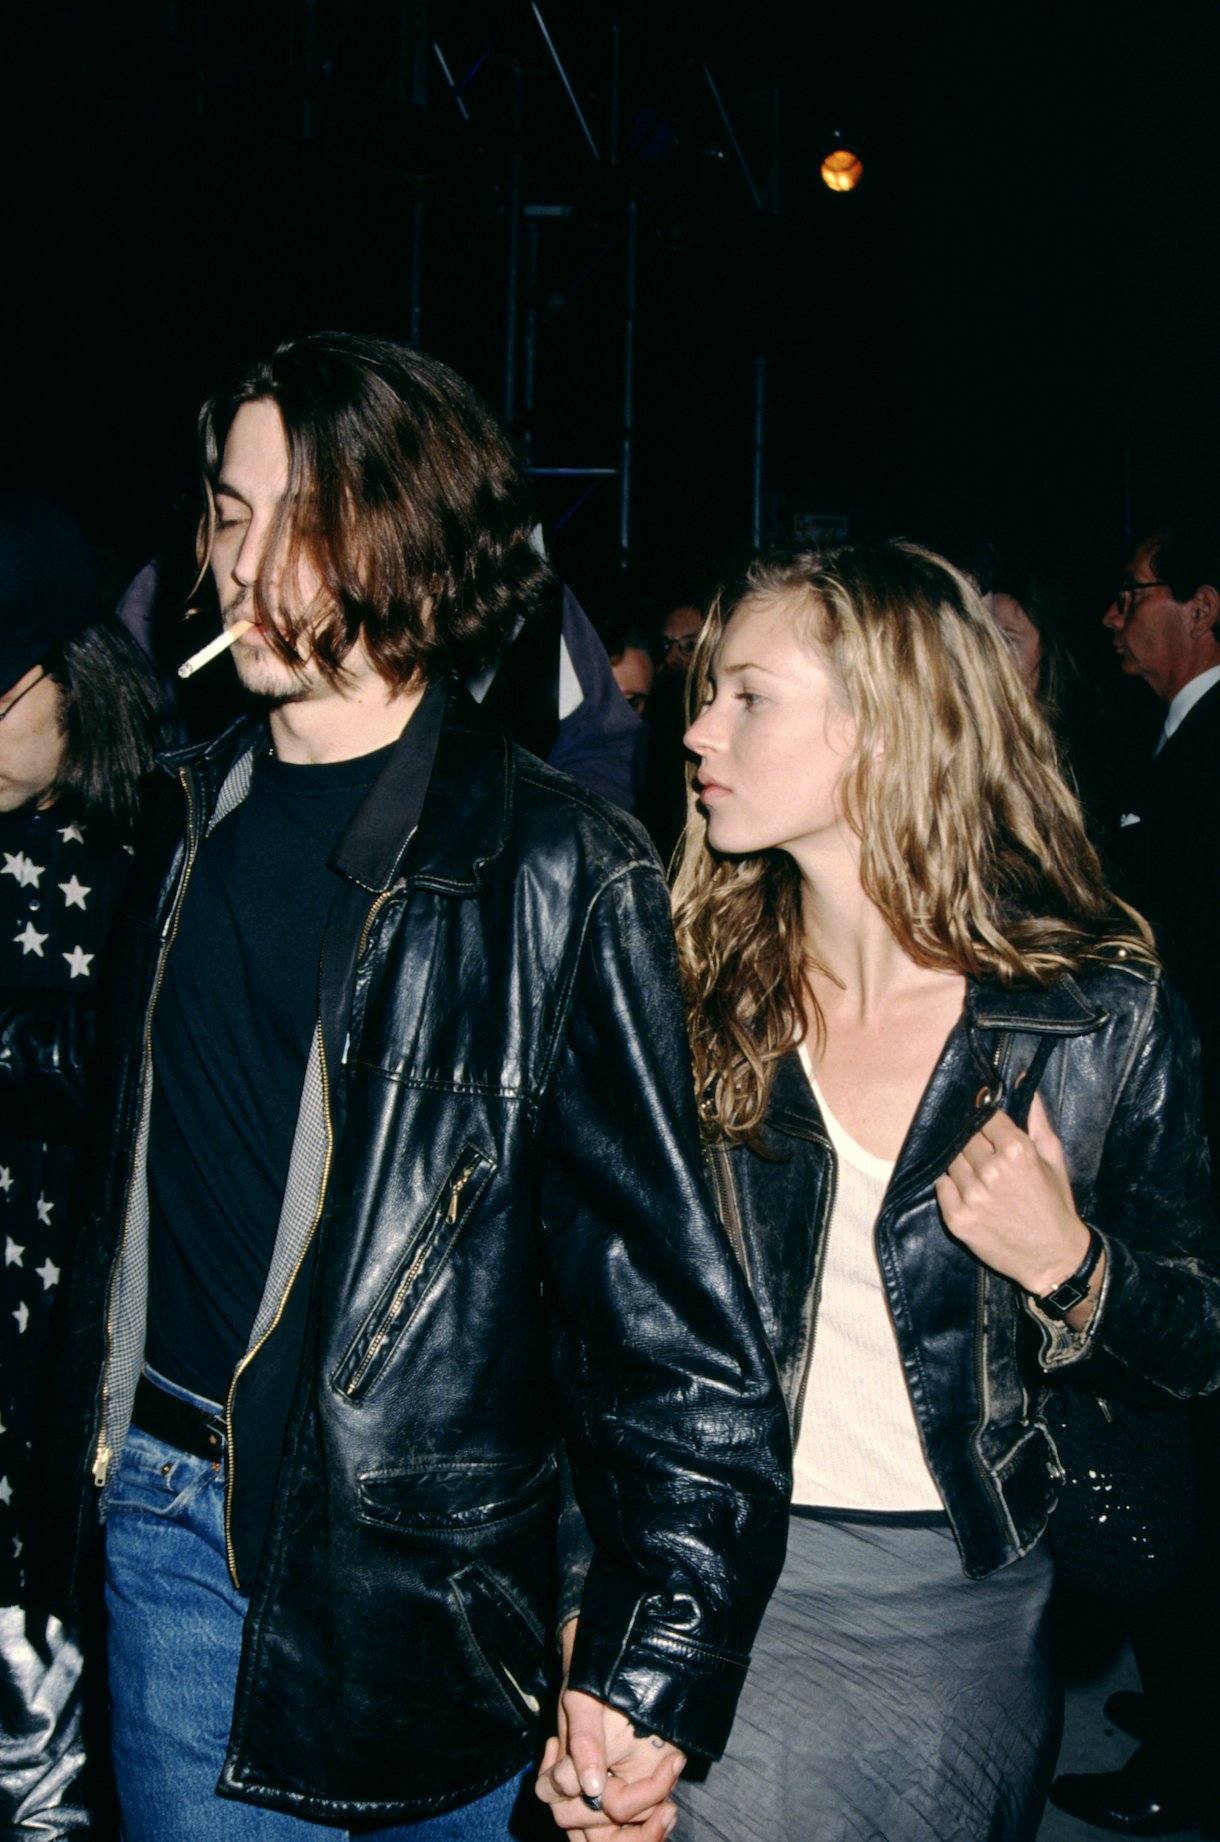 Why Did Johnny Depp and Kate Moss Break up?